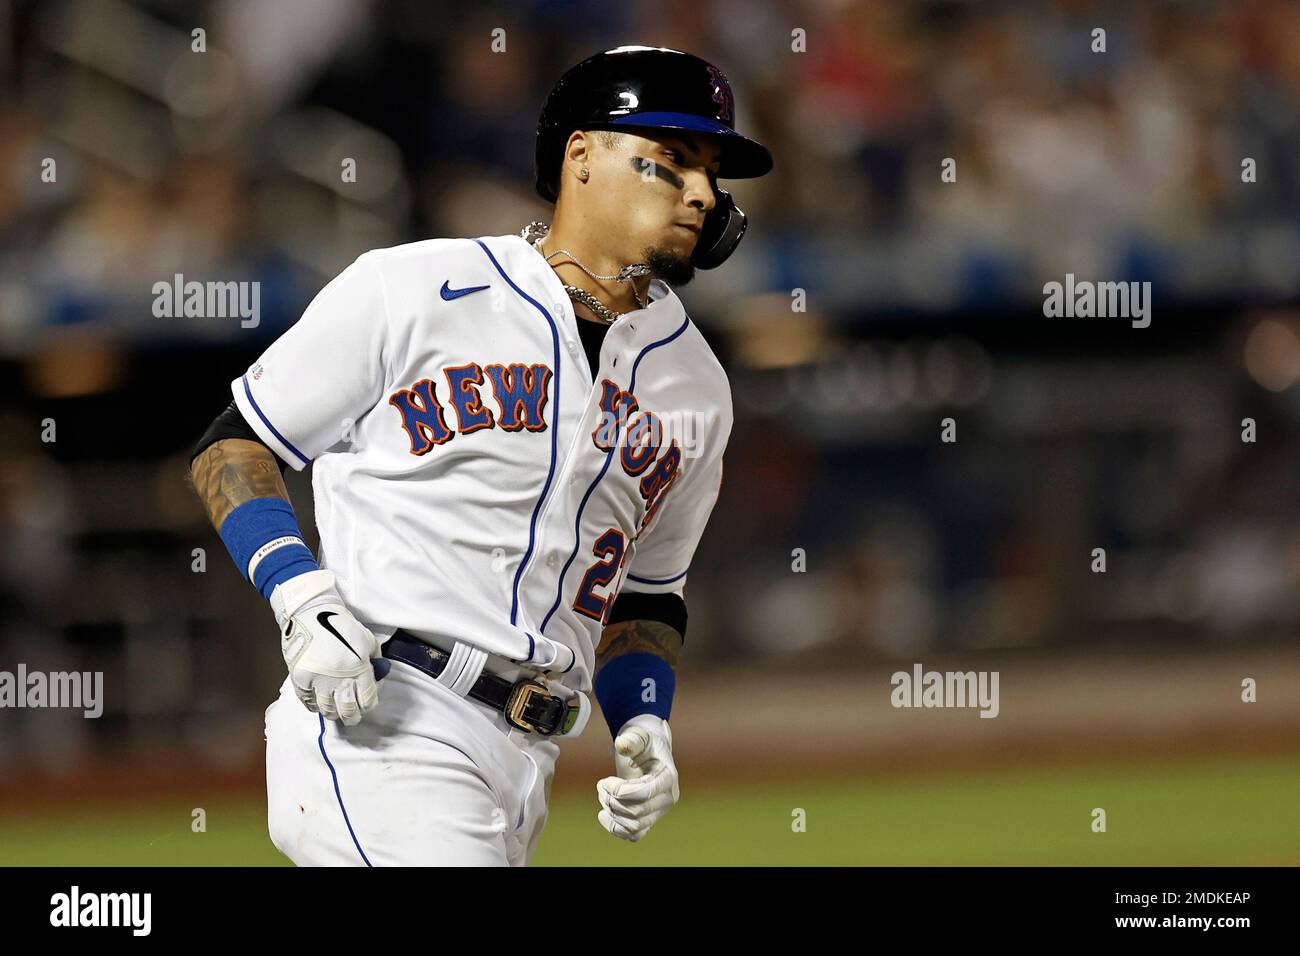 New York Mets' Javier Baez rounds the bases after hitting a home run  against the New York Yankees during the third inning of a baseball game on  Saturday, Sept. 11, 2021, in